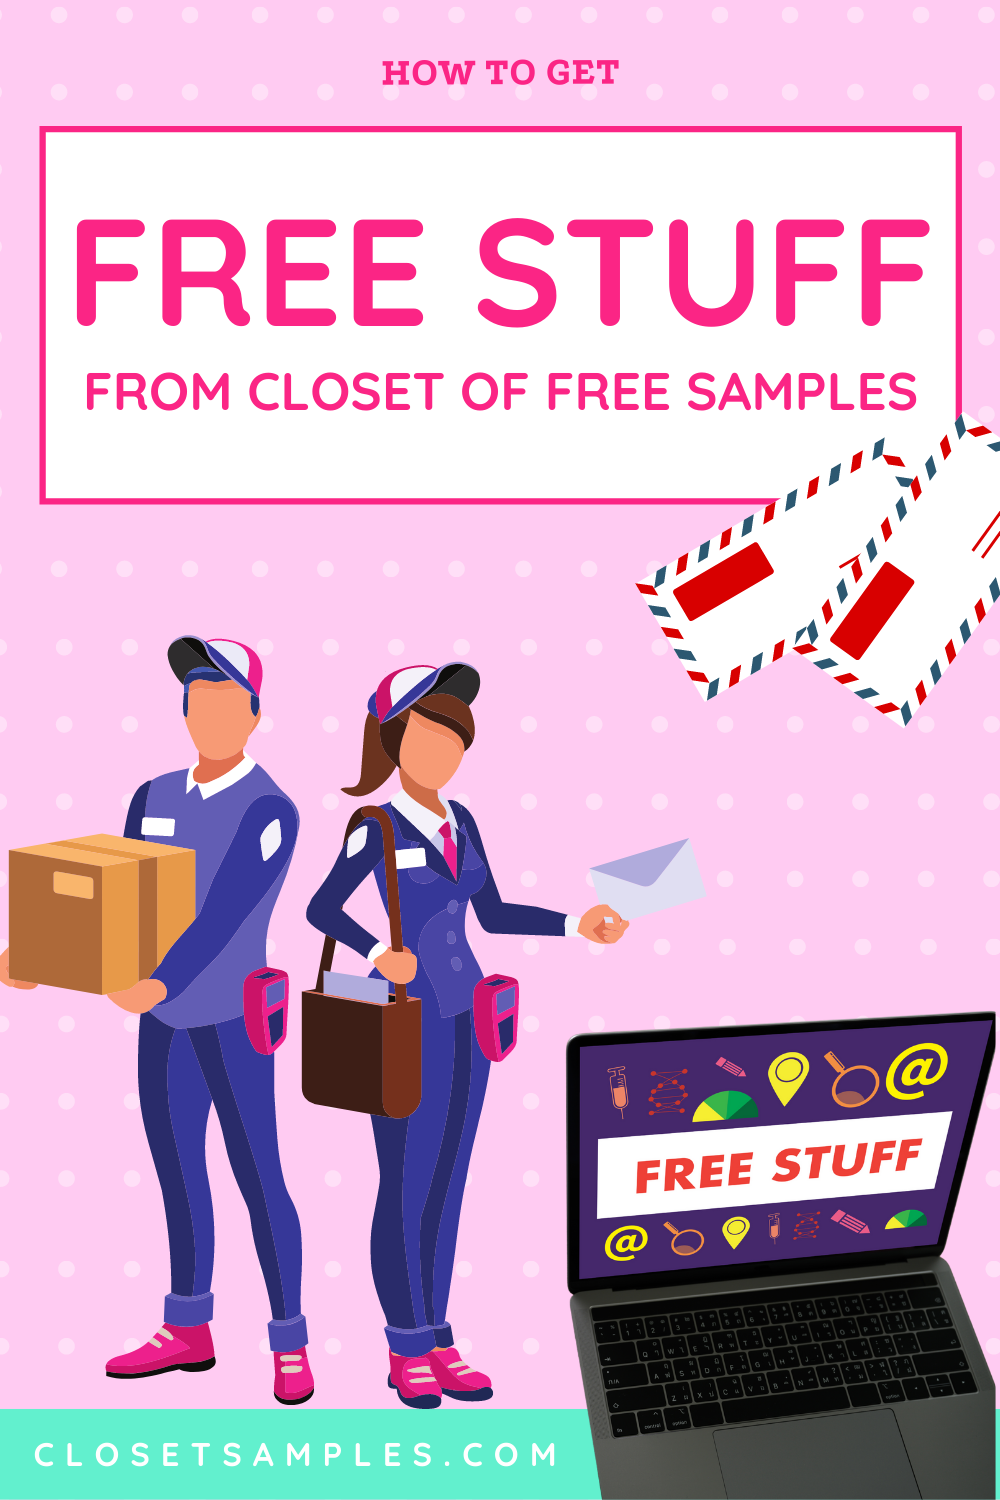 How-to-Get-Free-Stuff-from-Closet-of-Free-Samples-Pinterest.png